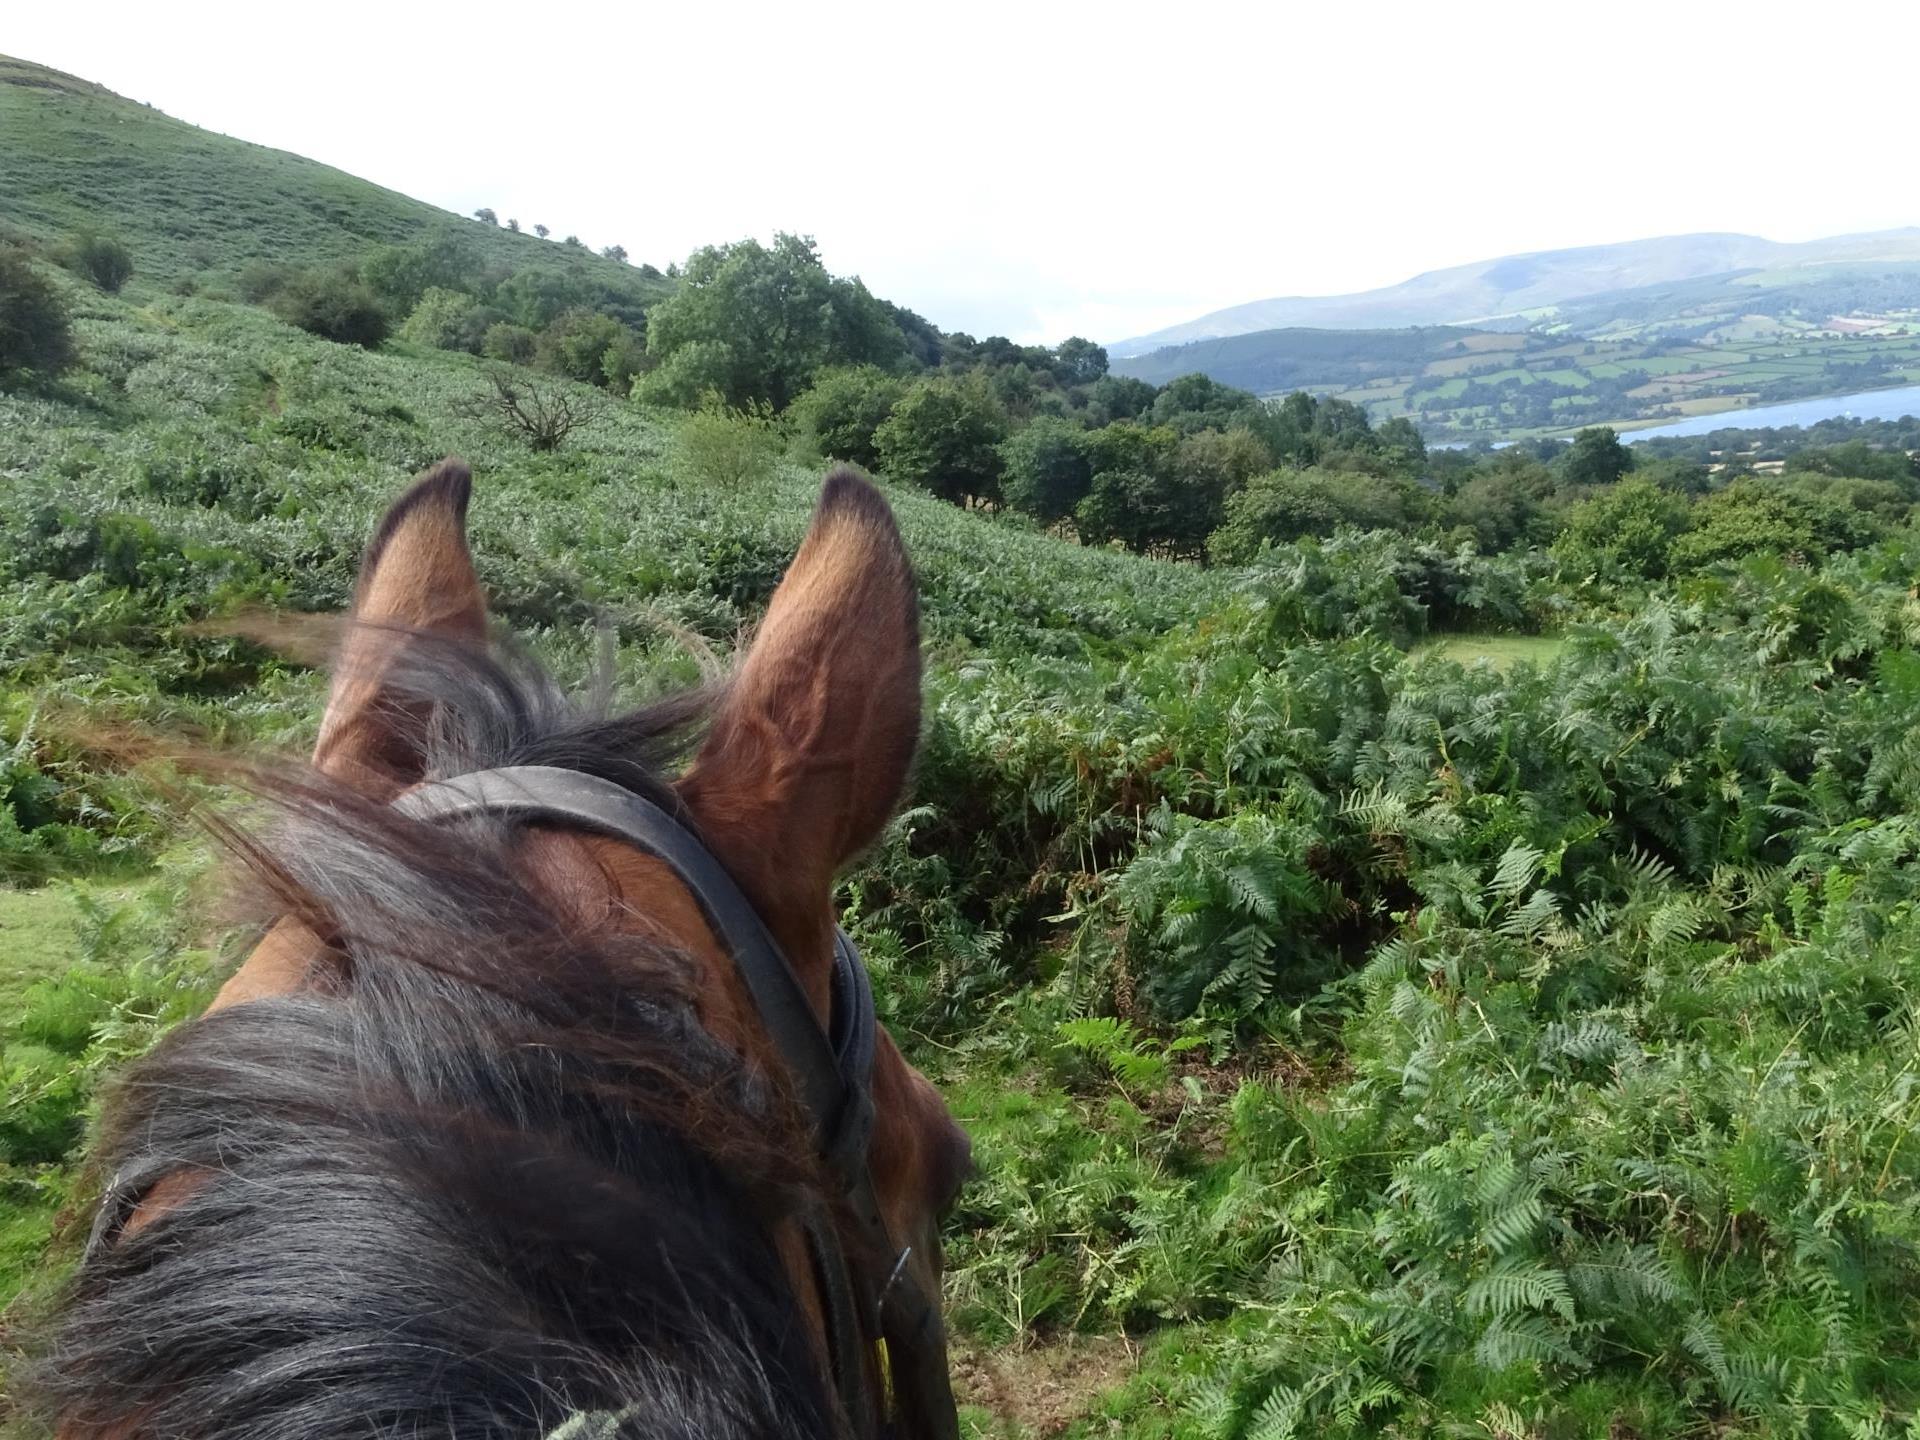 In the hills with Ellesmere Riding Centre